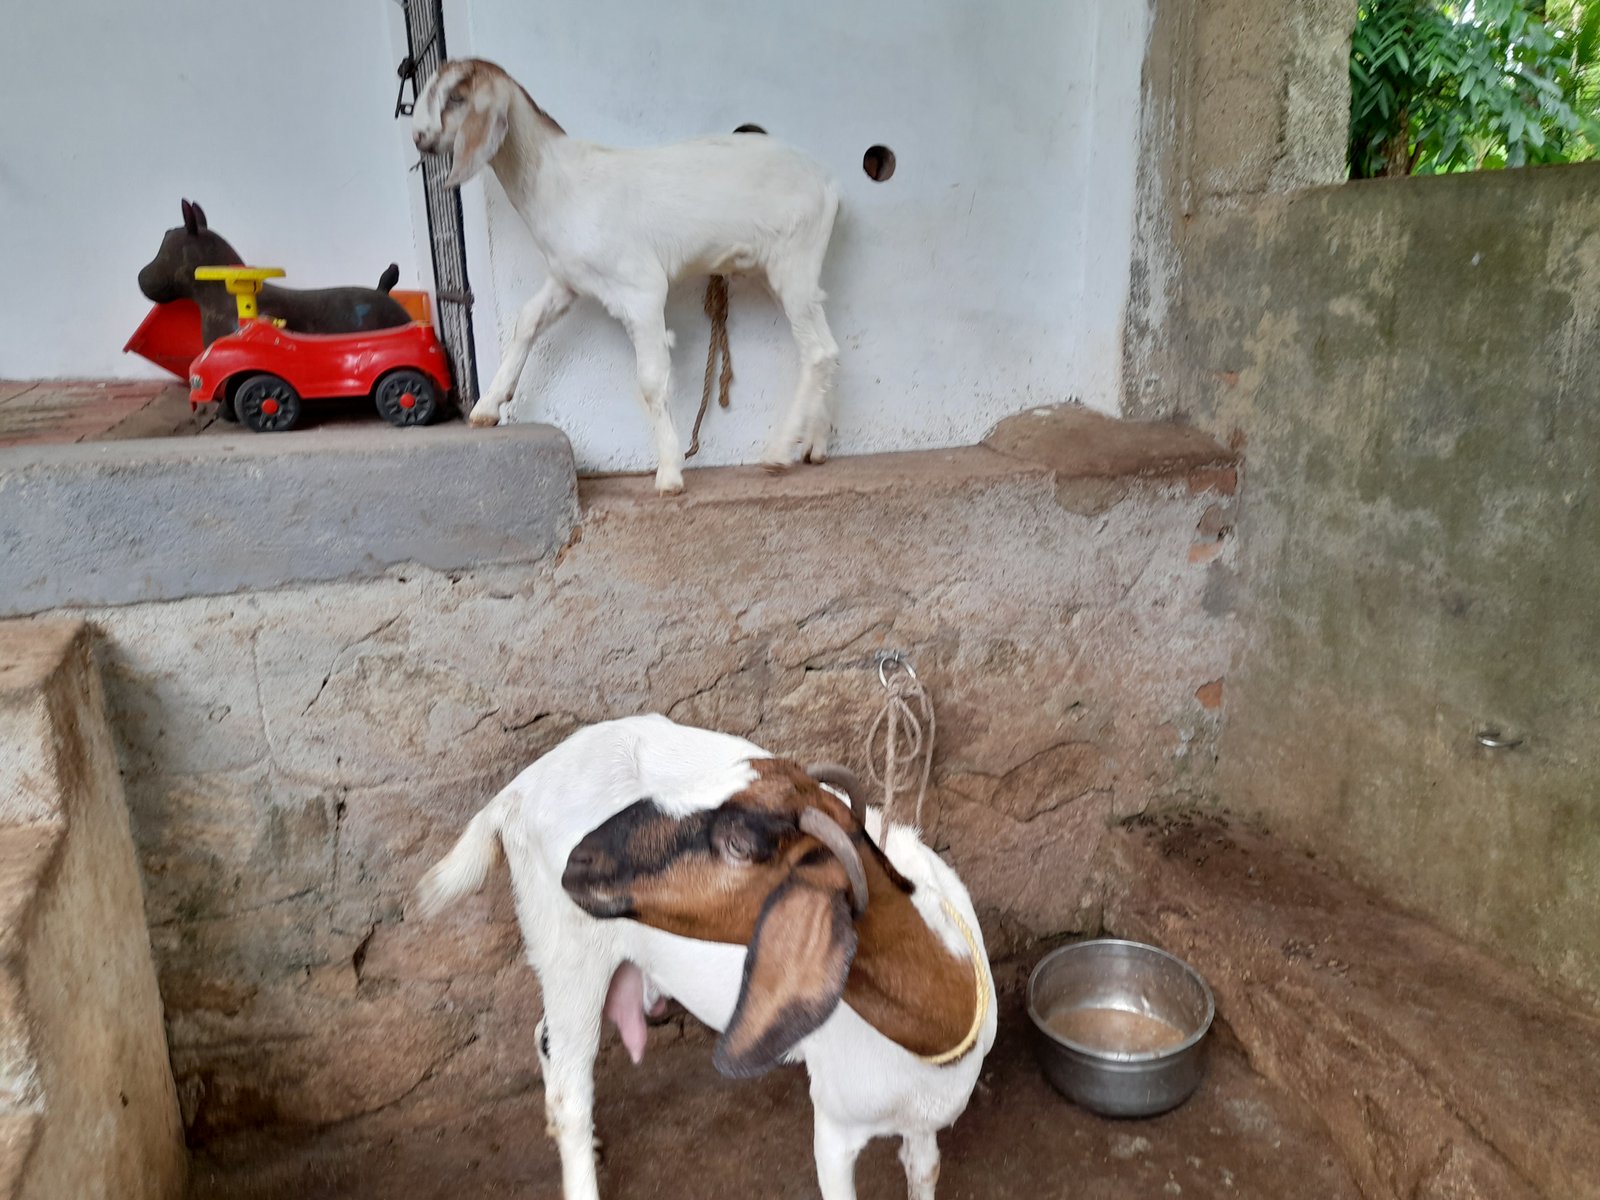 goat-for-sale-iid-737816